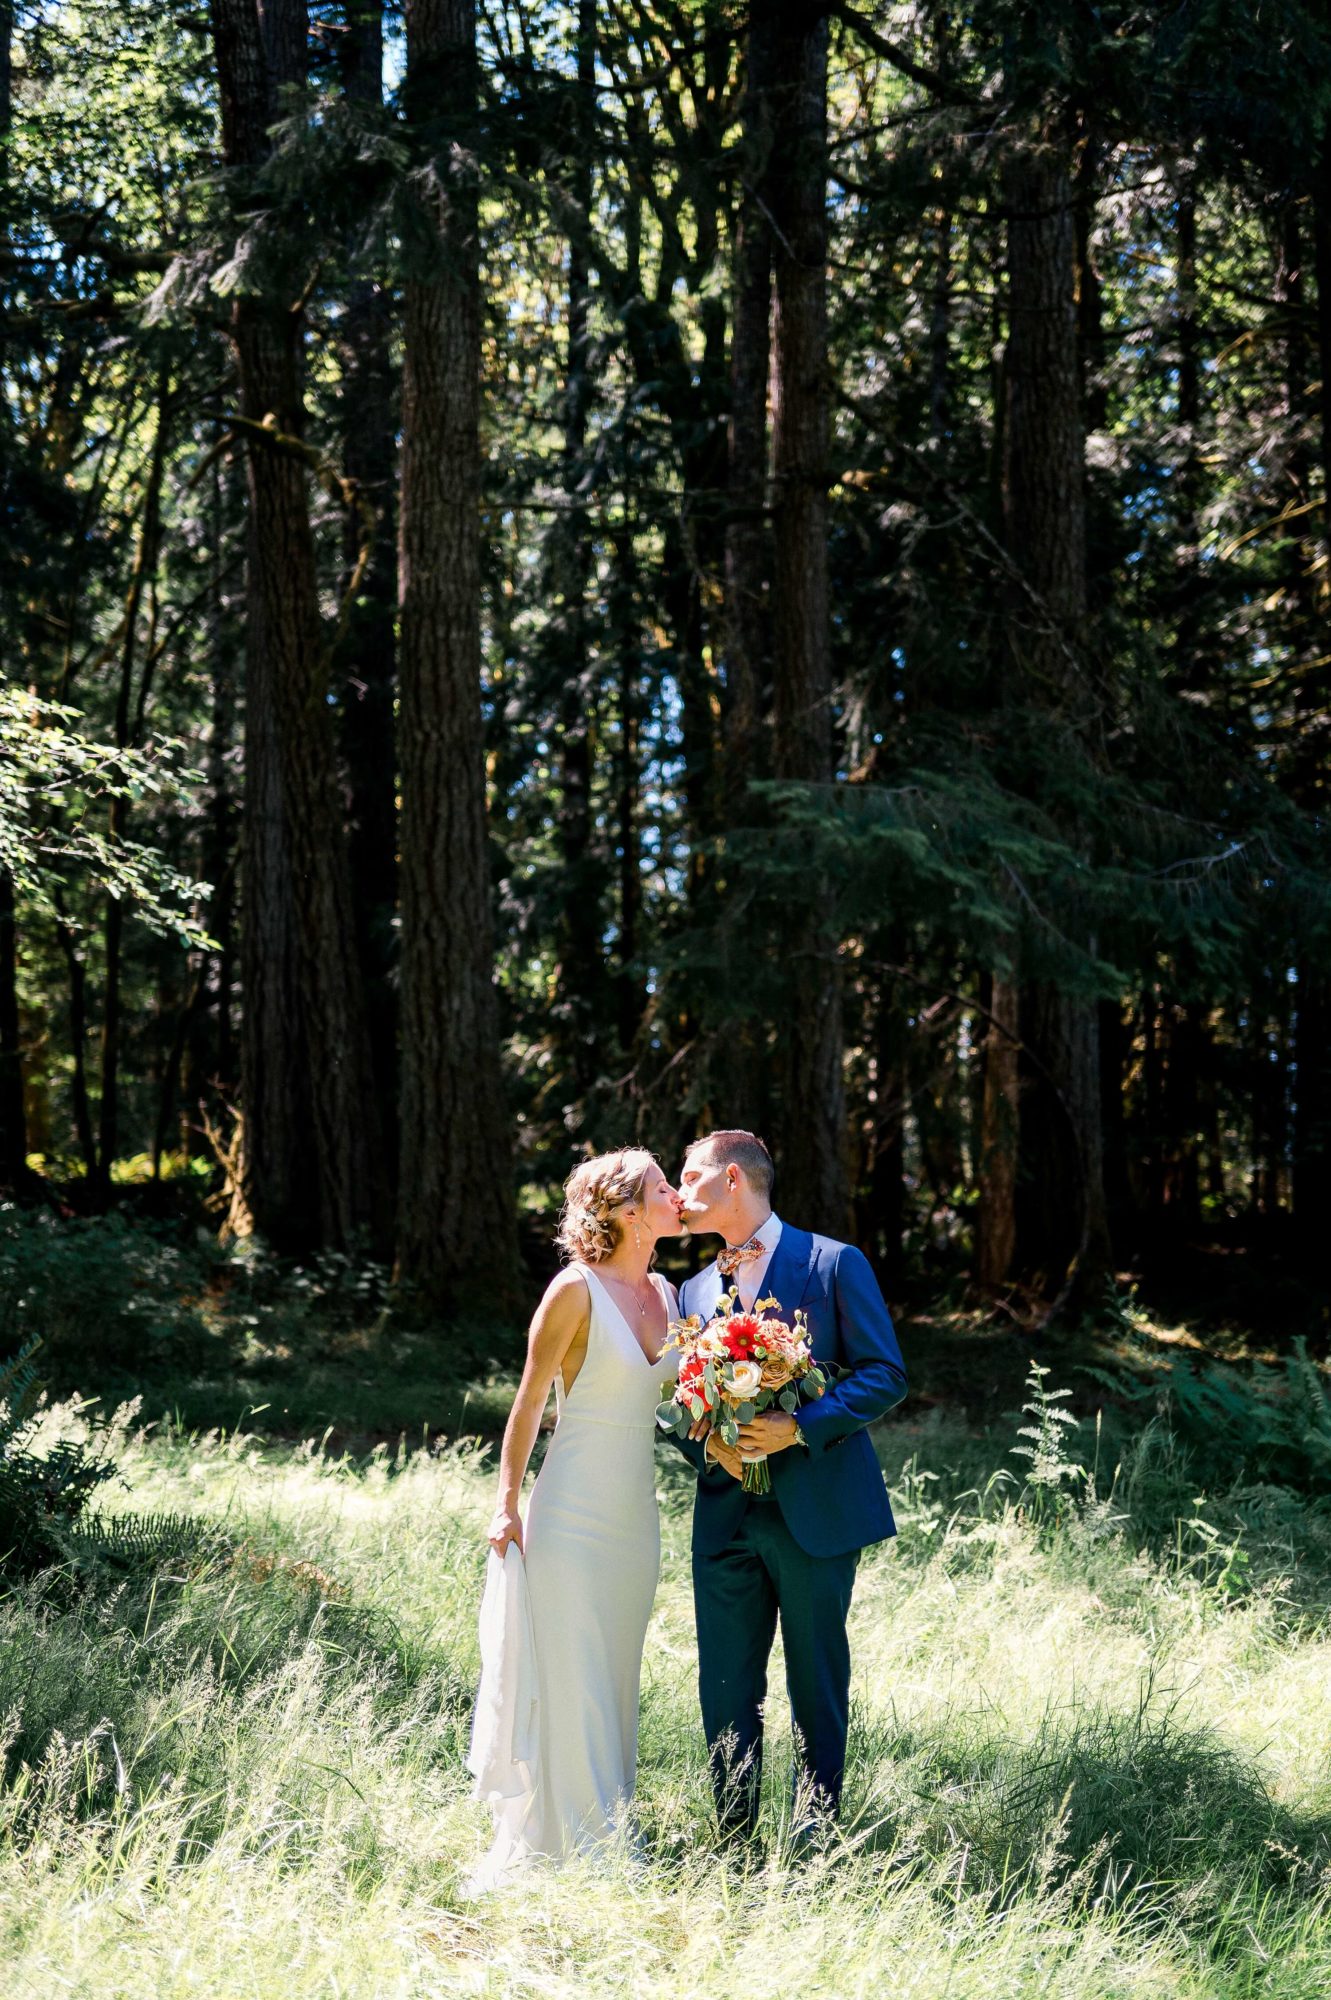 bride and grroom kiss in a grassy green field at The Lodge at St. Edwards